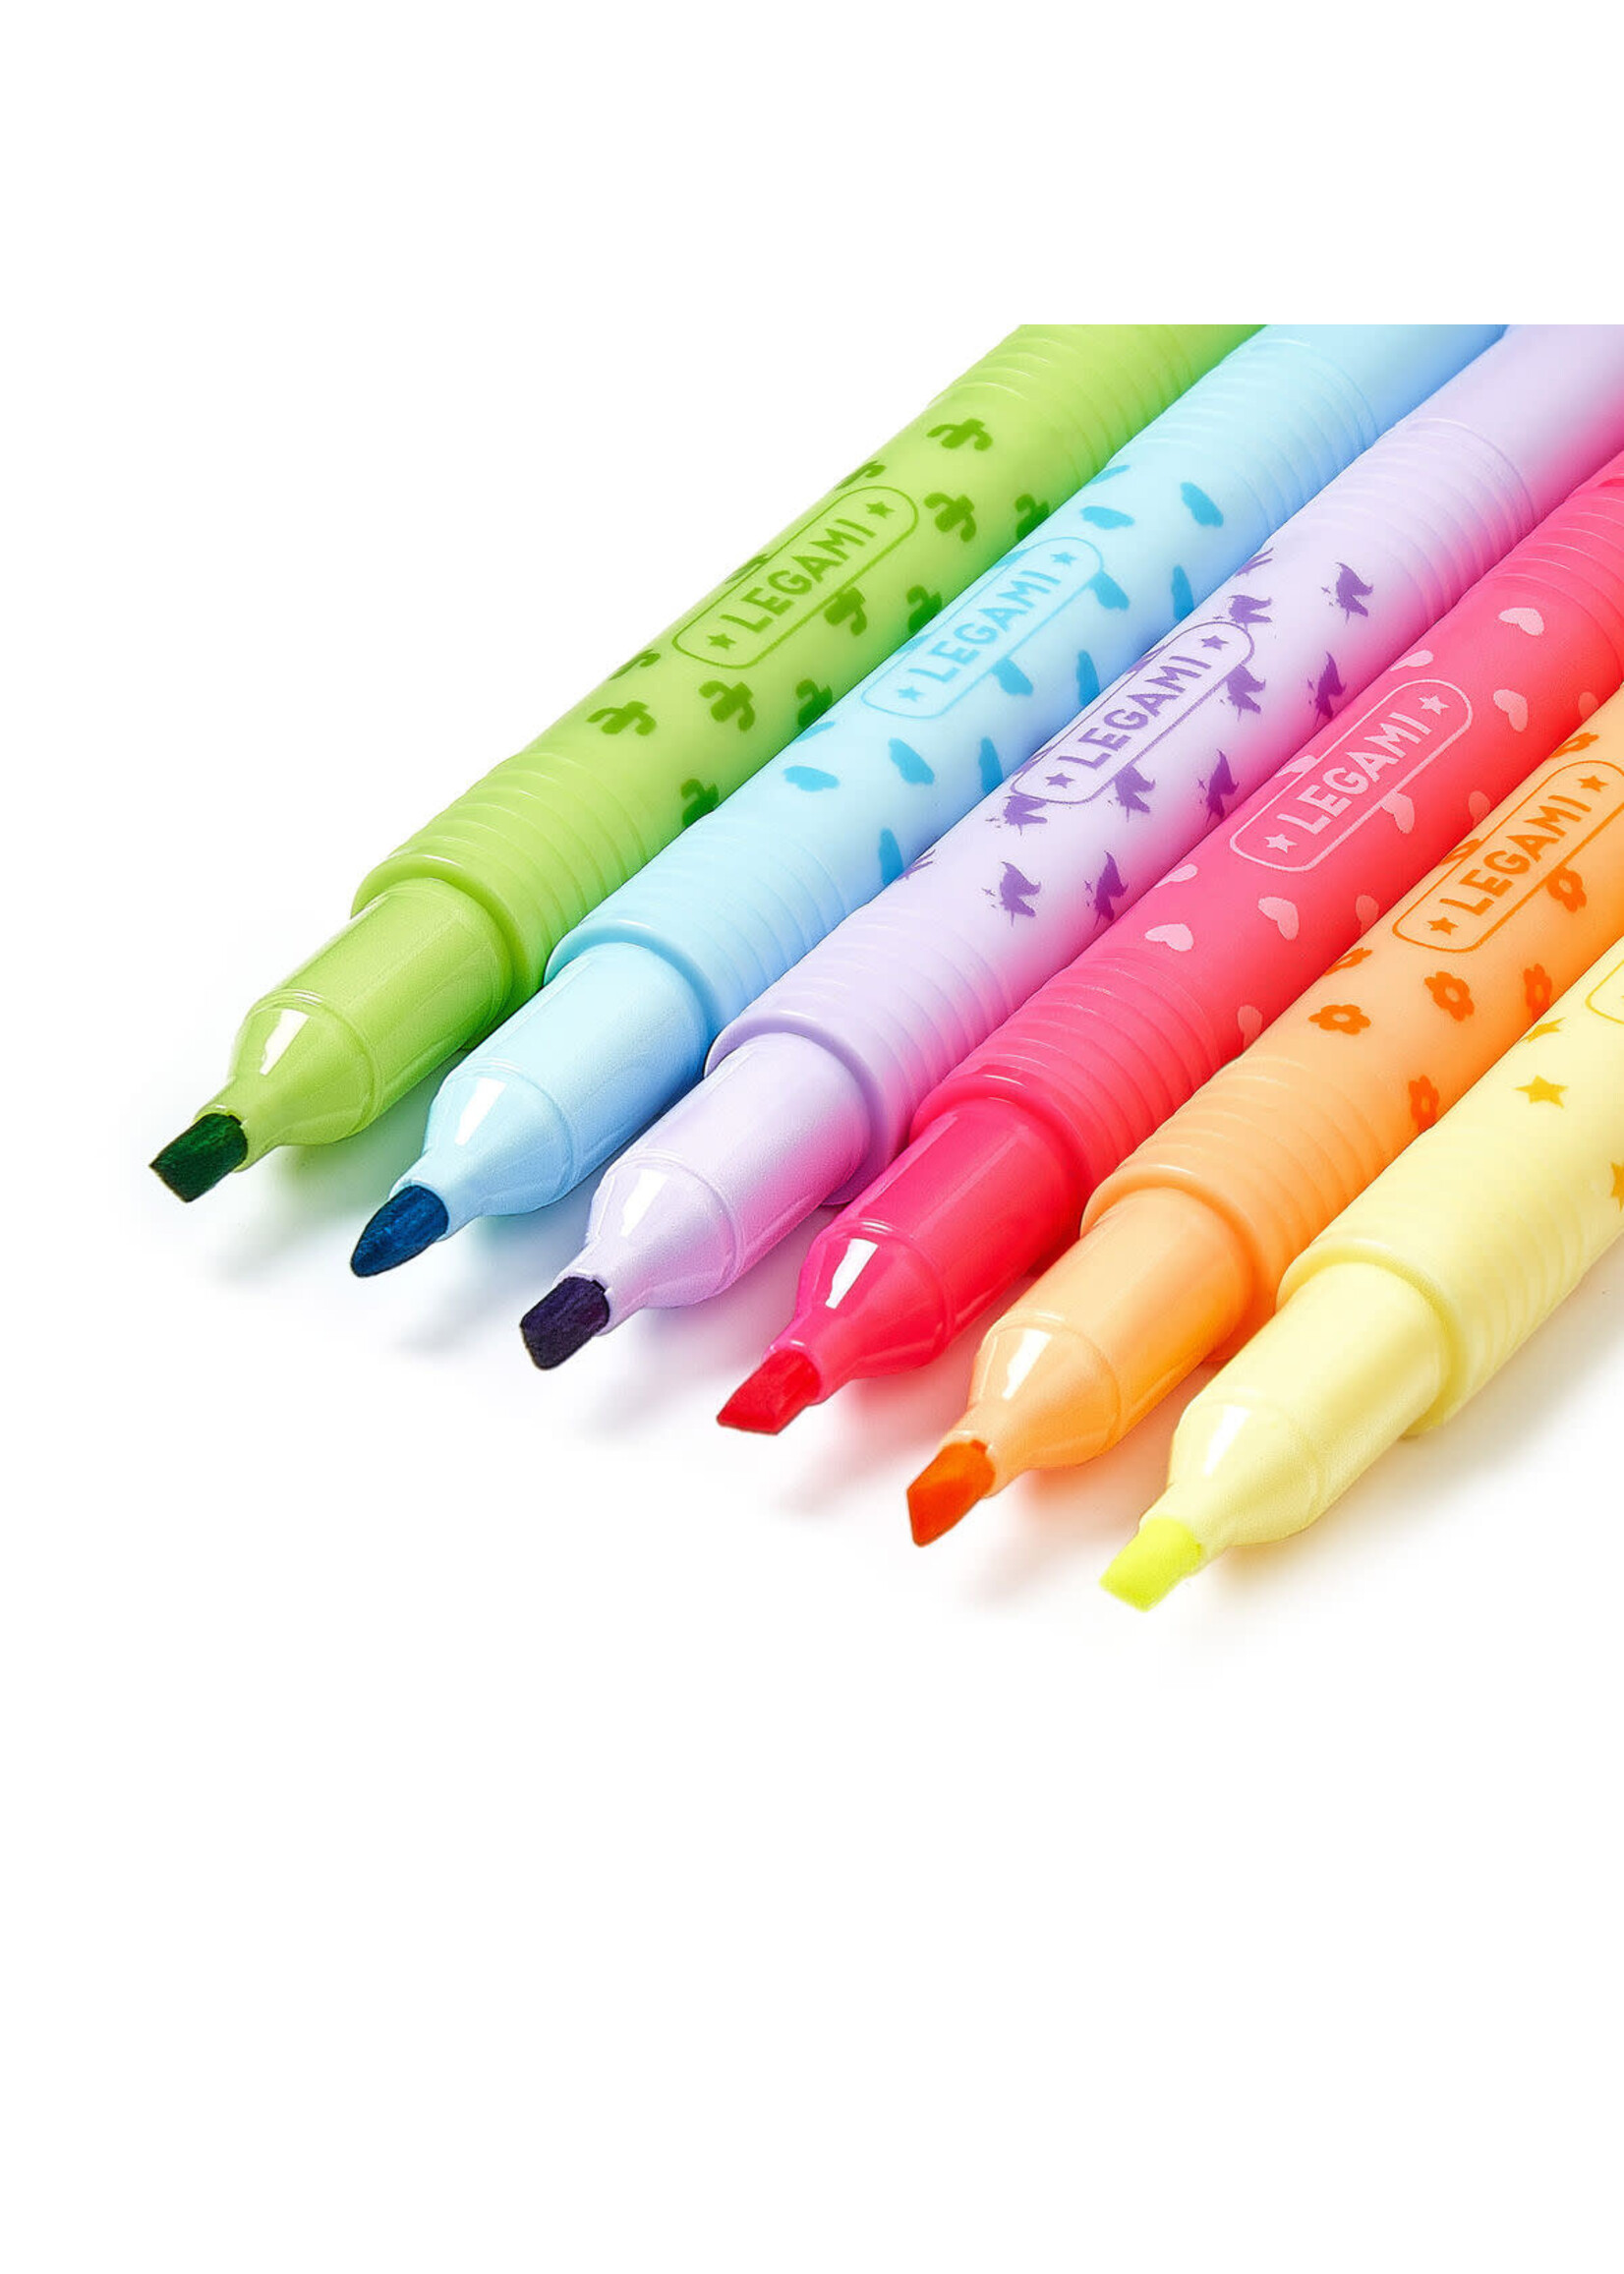 Legami Magic Highlighters Pack of 6